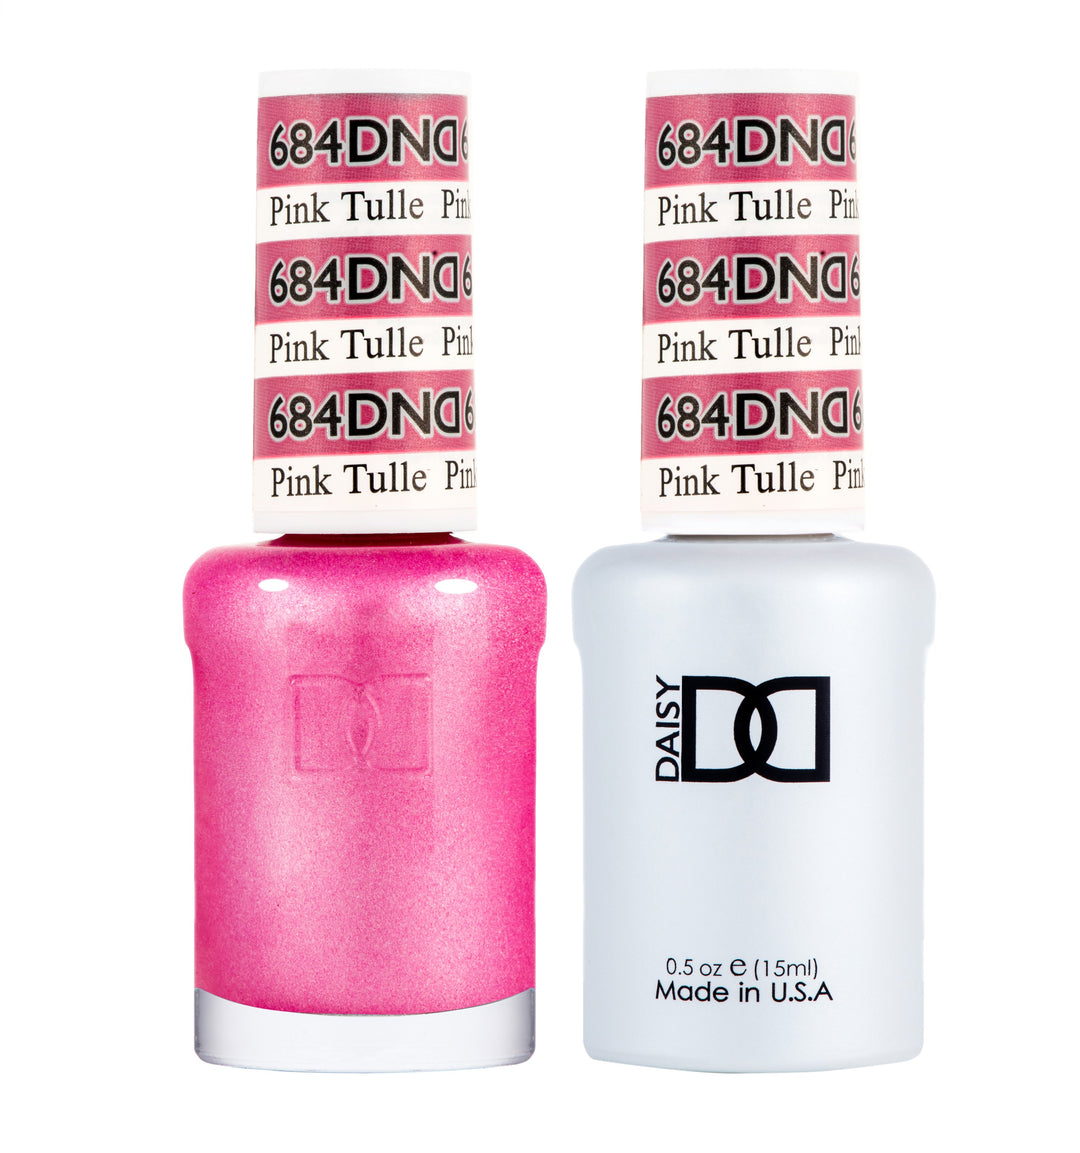 DND DUO Nail Lacquer and UV|LED Gel Polish Pink Tulle 684 (2 x 15ml)